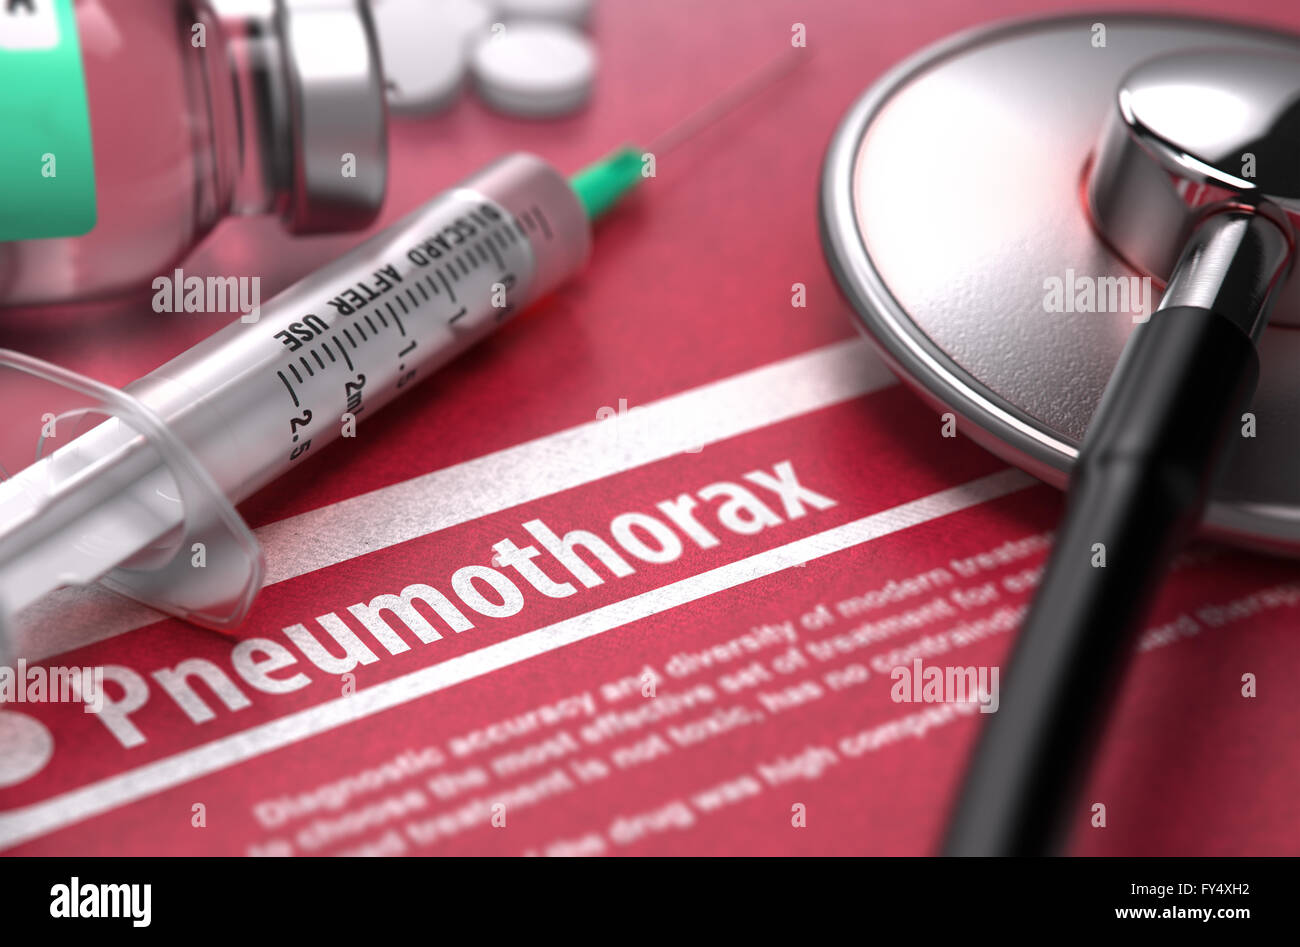 Pneumothorax. Medical Concept on Red Background. Stock Photo